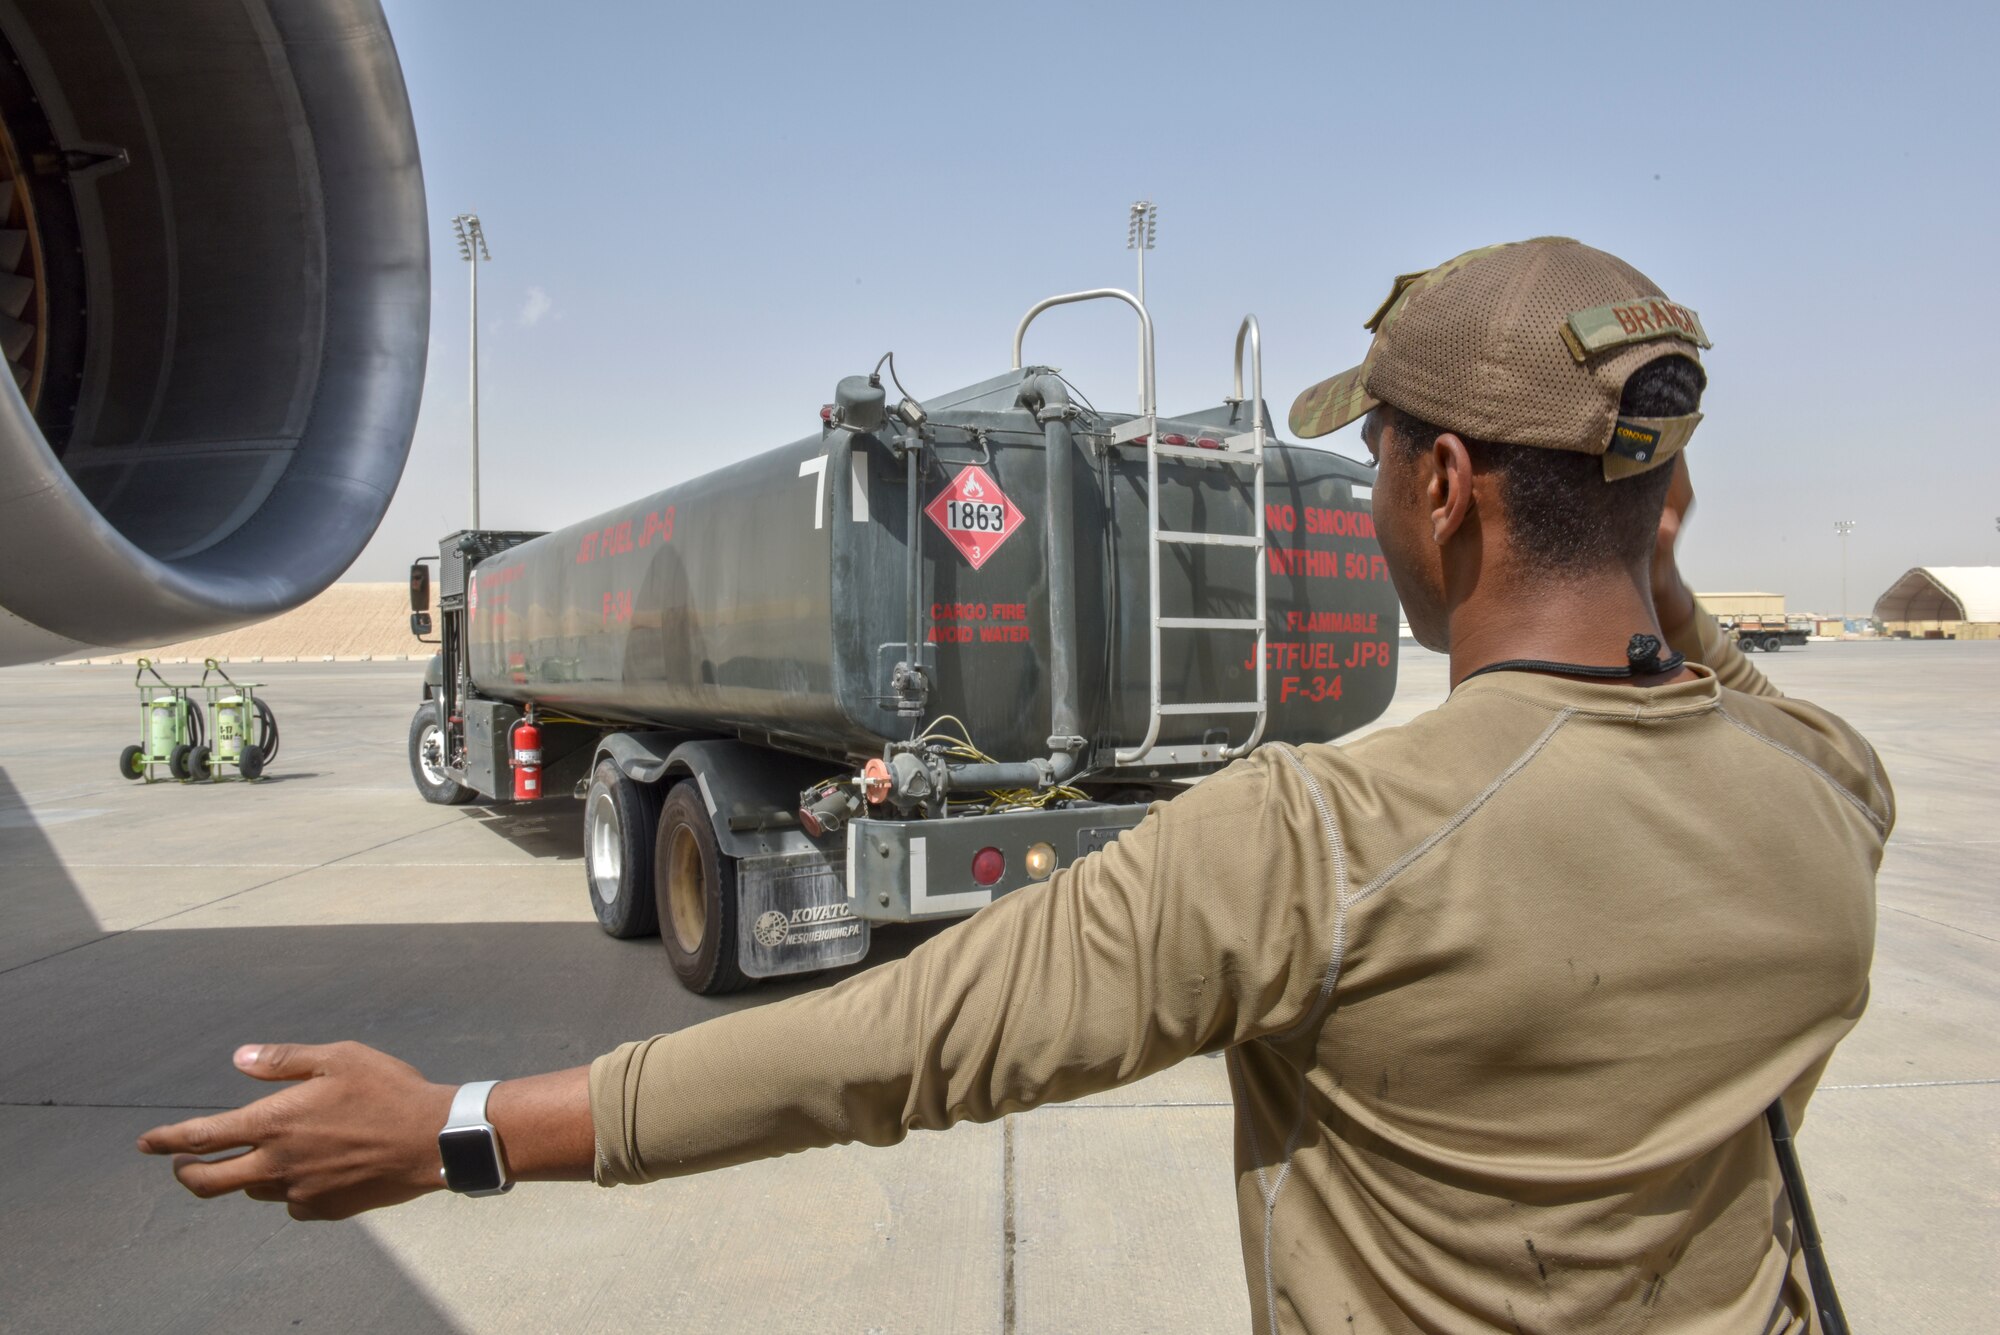 Airmen with the 8th Expeditionary Air Mobility Squadron move cargo on the flightline at Al Udeid Air Base, Qatar on April 28, 2020. The 8 EAMS Airmen support dozens of missions per day, often moving hundreds of thousands of pounds of cargo and service members around the U.S. Air Forces Central Command area of responsibility. (U.S. Air Force photo by Tech. Sgt. John Wilkes)